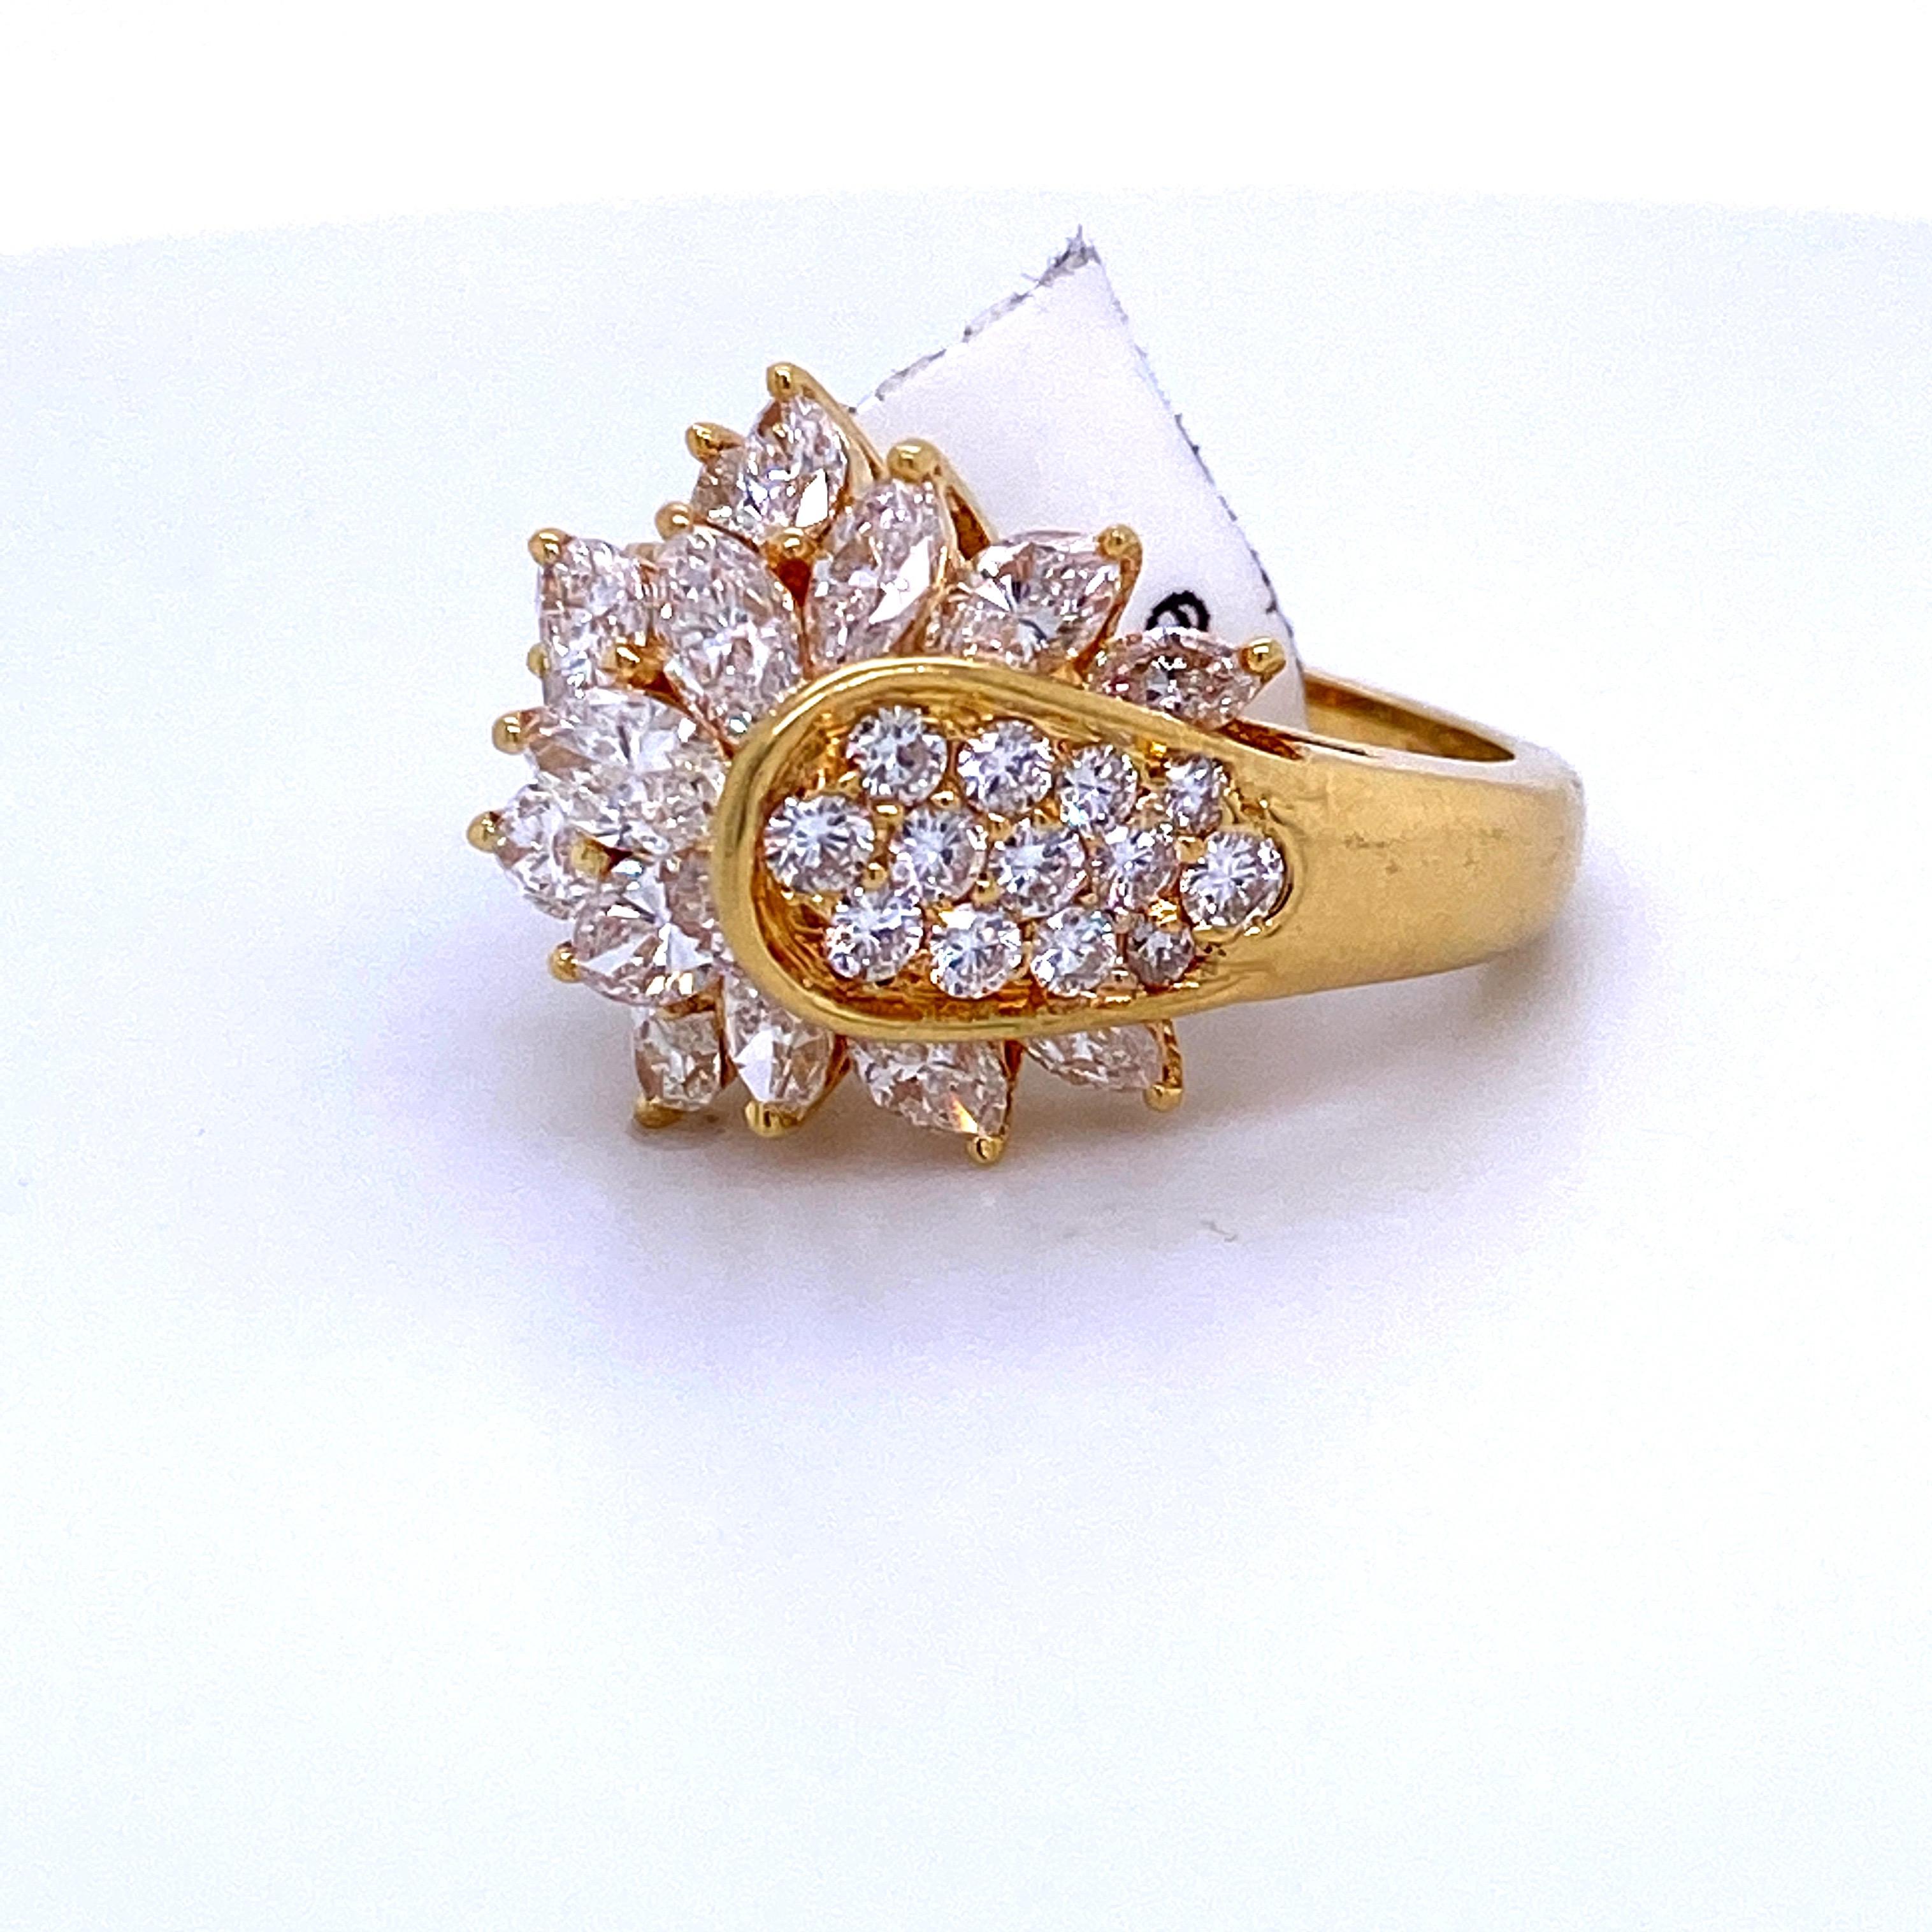 18K Yellow gold cluster ring featuring 18 round brilliants weighing 0.65 carats and 16 marquise diamonds weighing 2.49 carats. 
Color G
Clarity SI

Size 6.75
Sizeable free of charge.